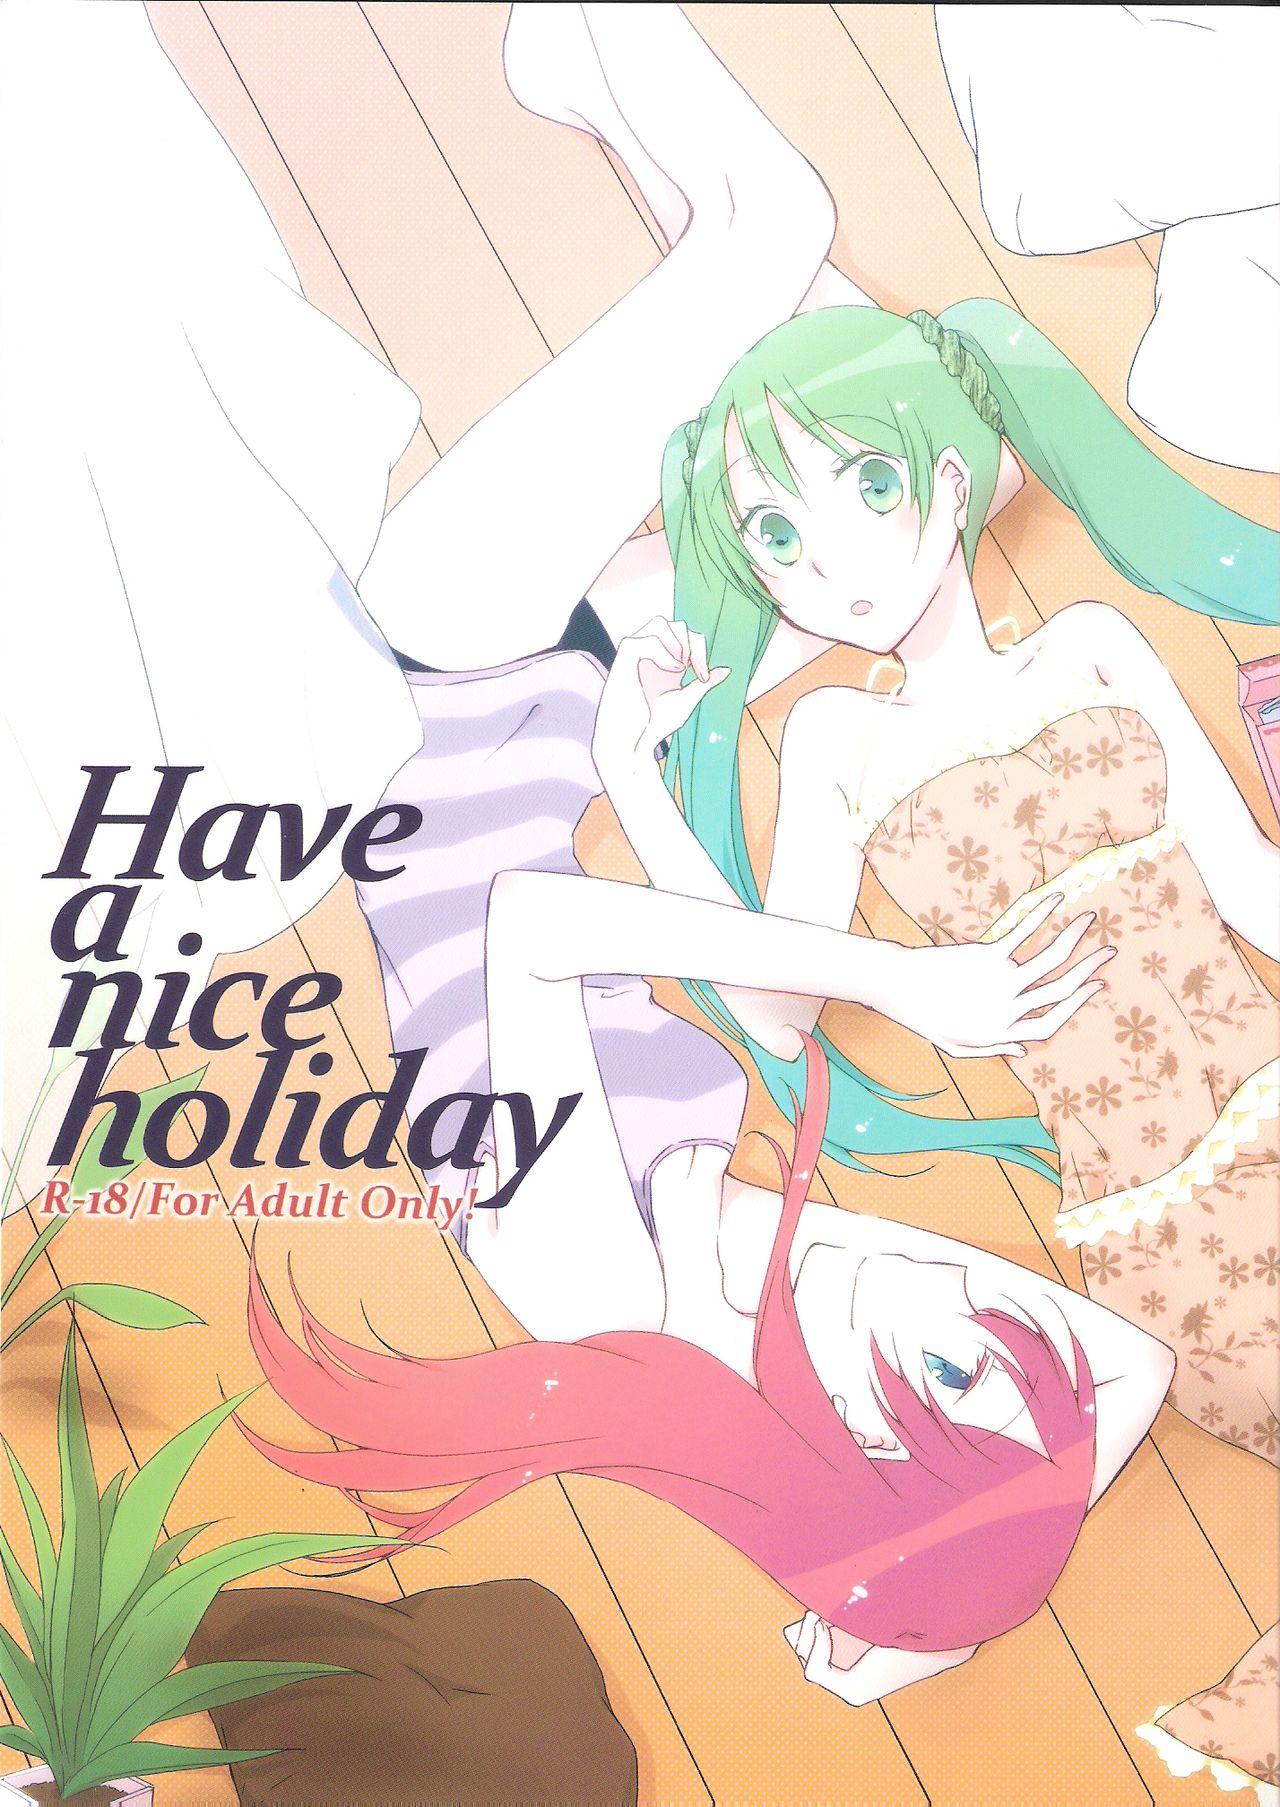 Have a nice holiday 1